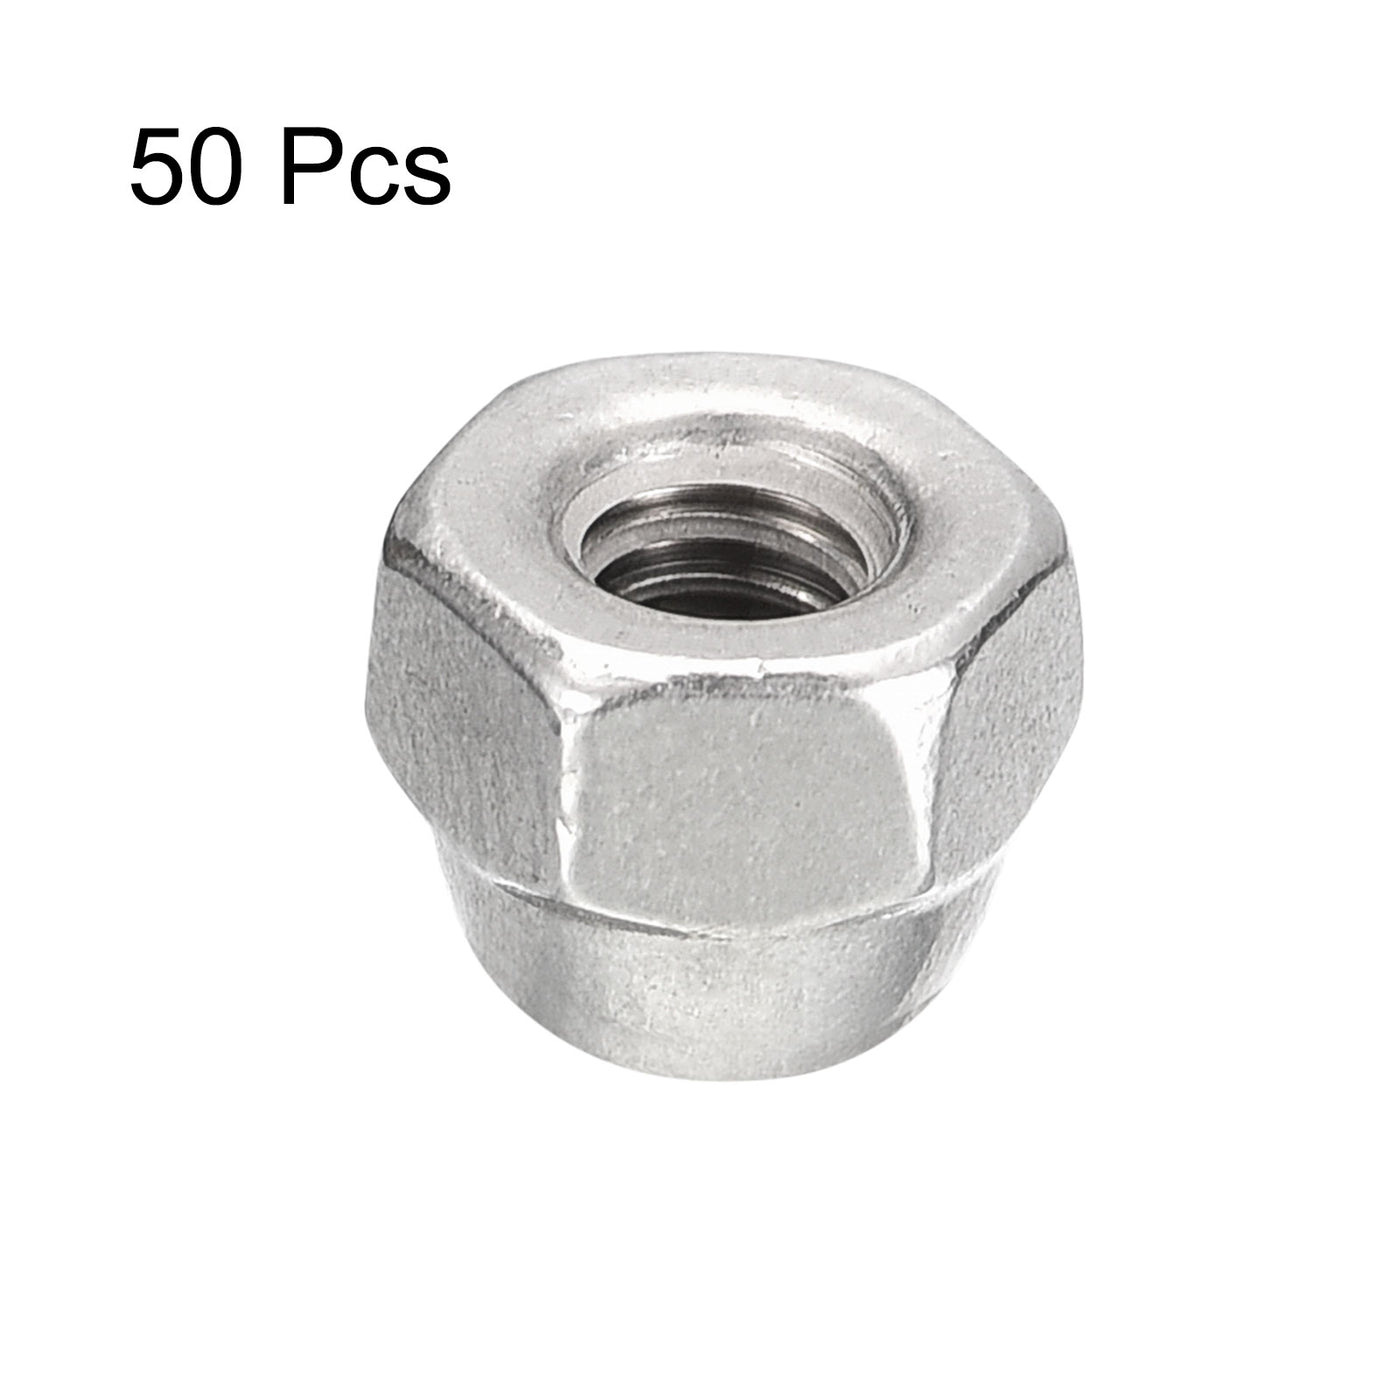 uxcell Uxcell #6-32 Acorn Cap Nuts,50pcs - 304 Stainless Steel Hardware Nuts, Acorn Hex Cap Dome Head Nuts for Fasteners (Silver)